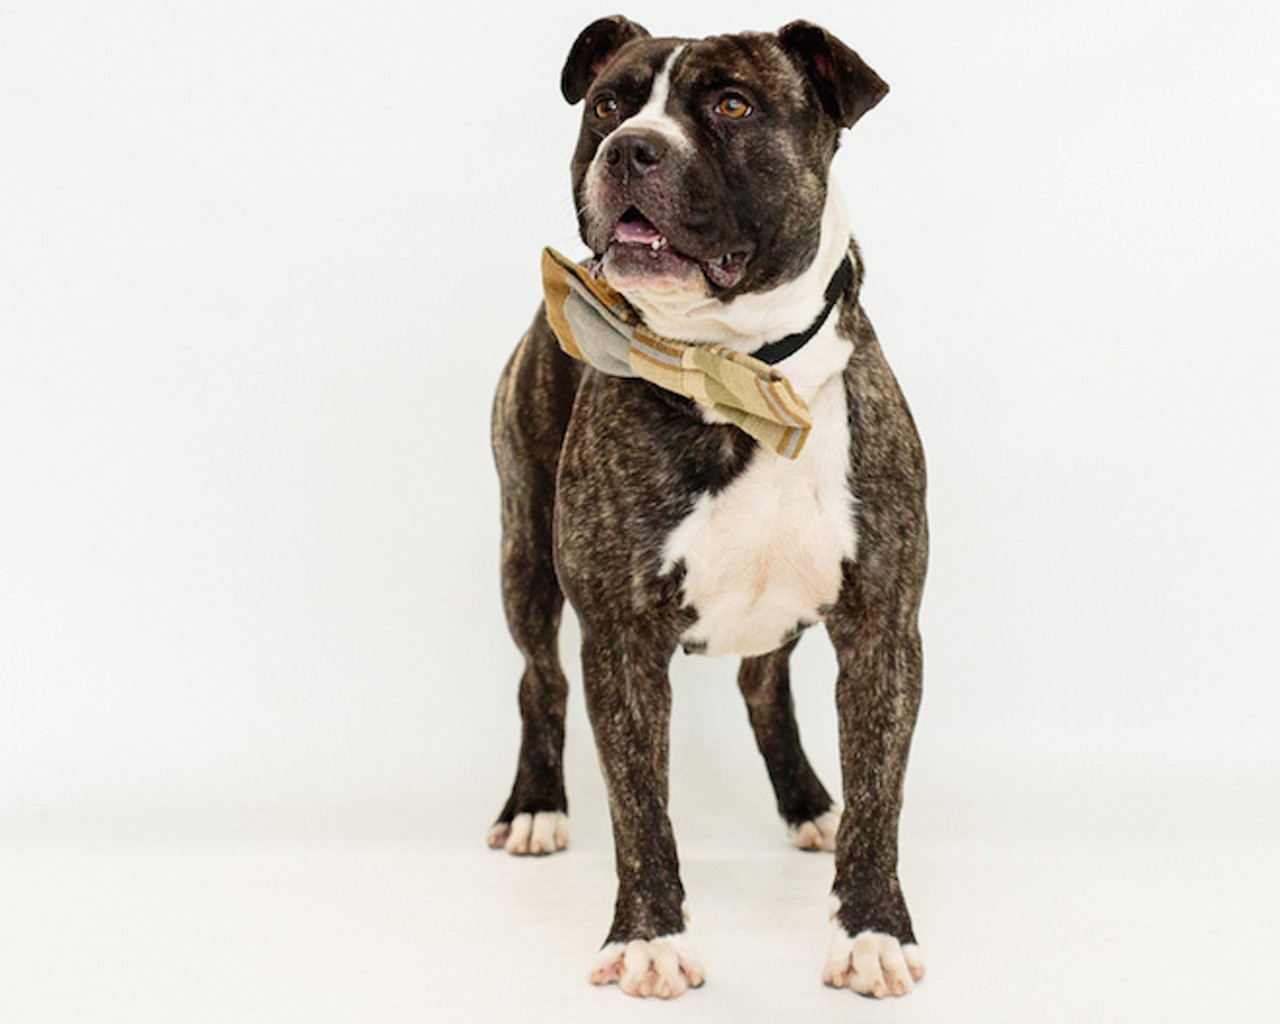 Are you lonesome tonight? Here are 24 adoptable dogs who'll keep you company